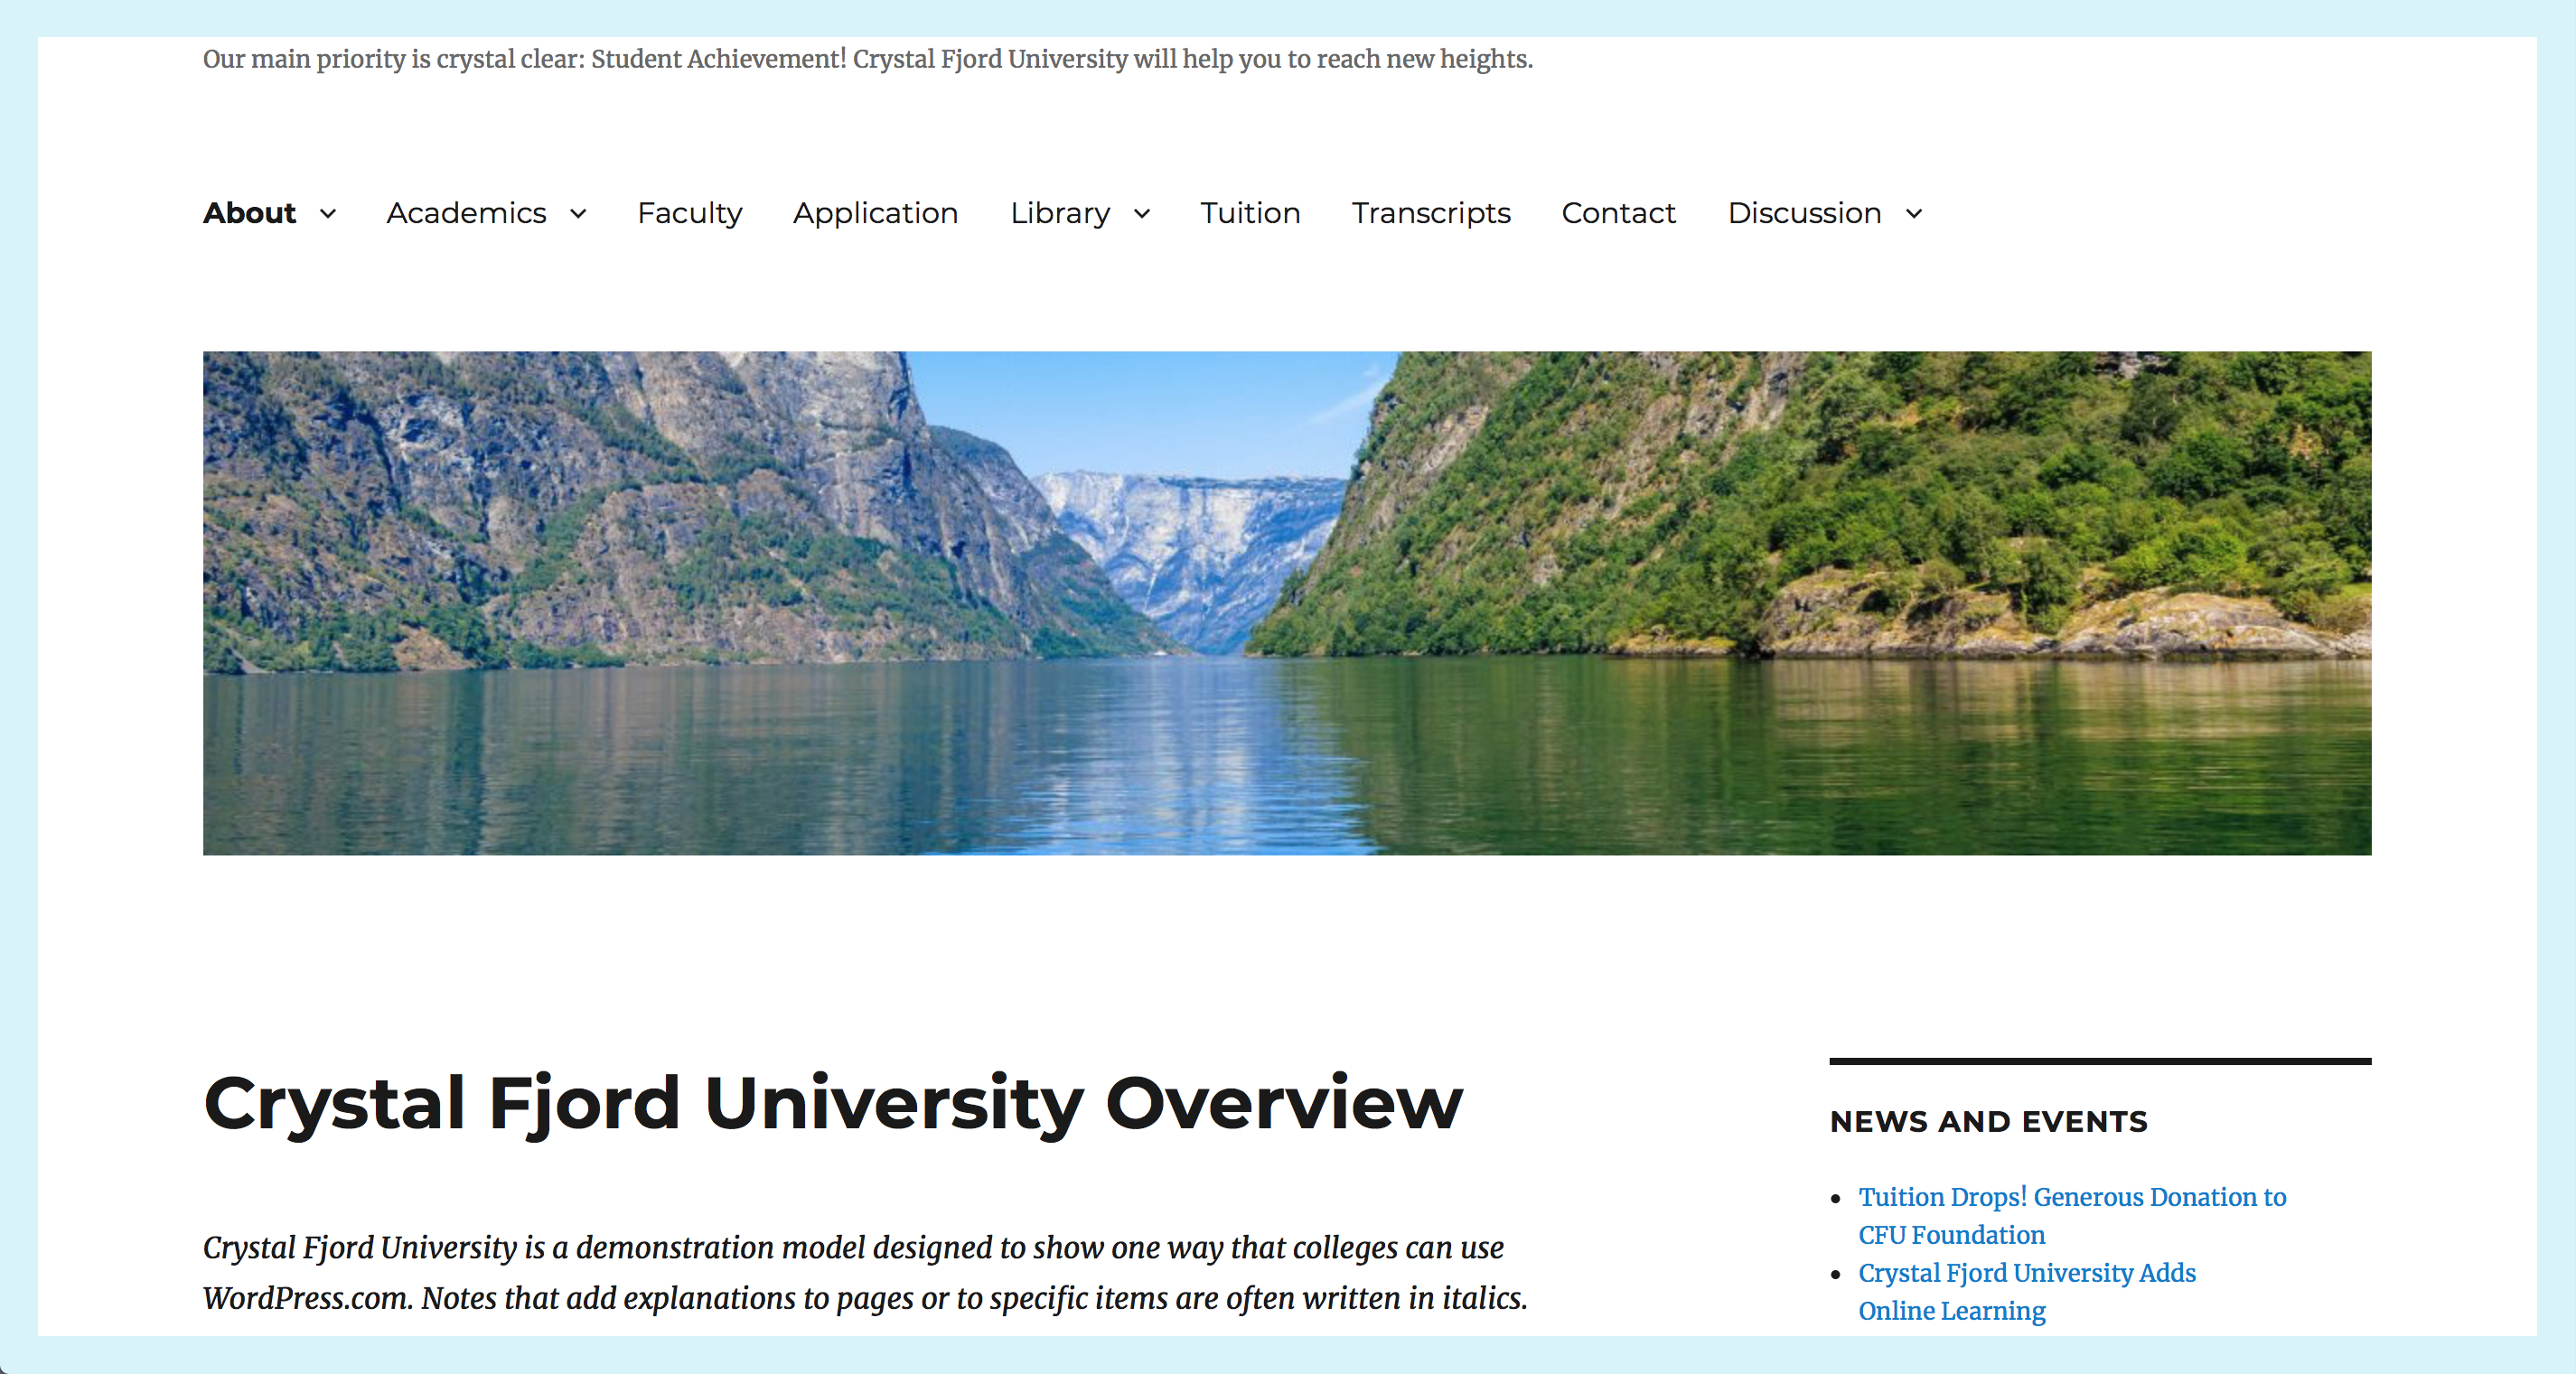 click on this picture to go to the Crystal Fjord University website. The picture shows a portion of the landing page, including a river cutting through mountains fjord style.